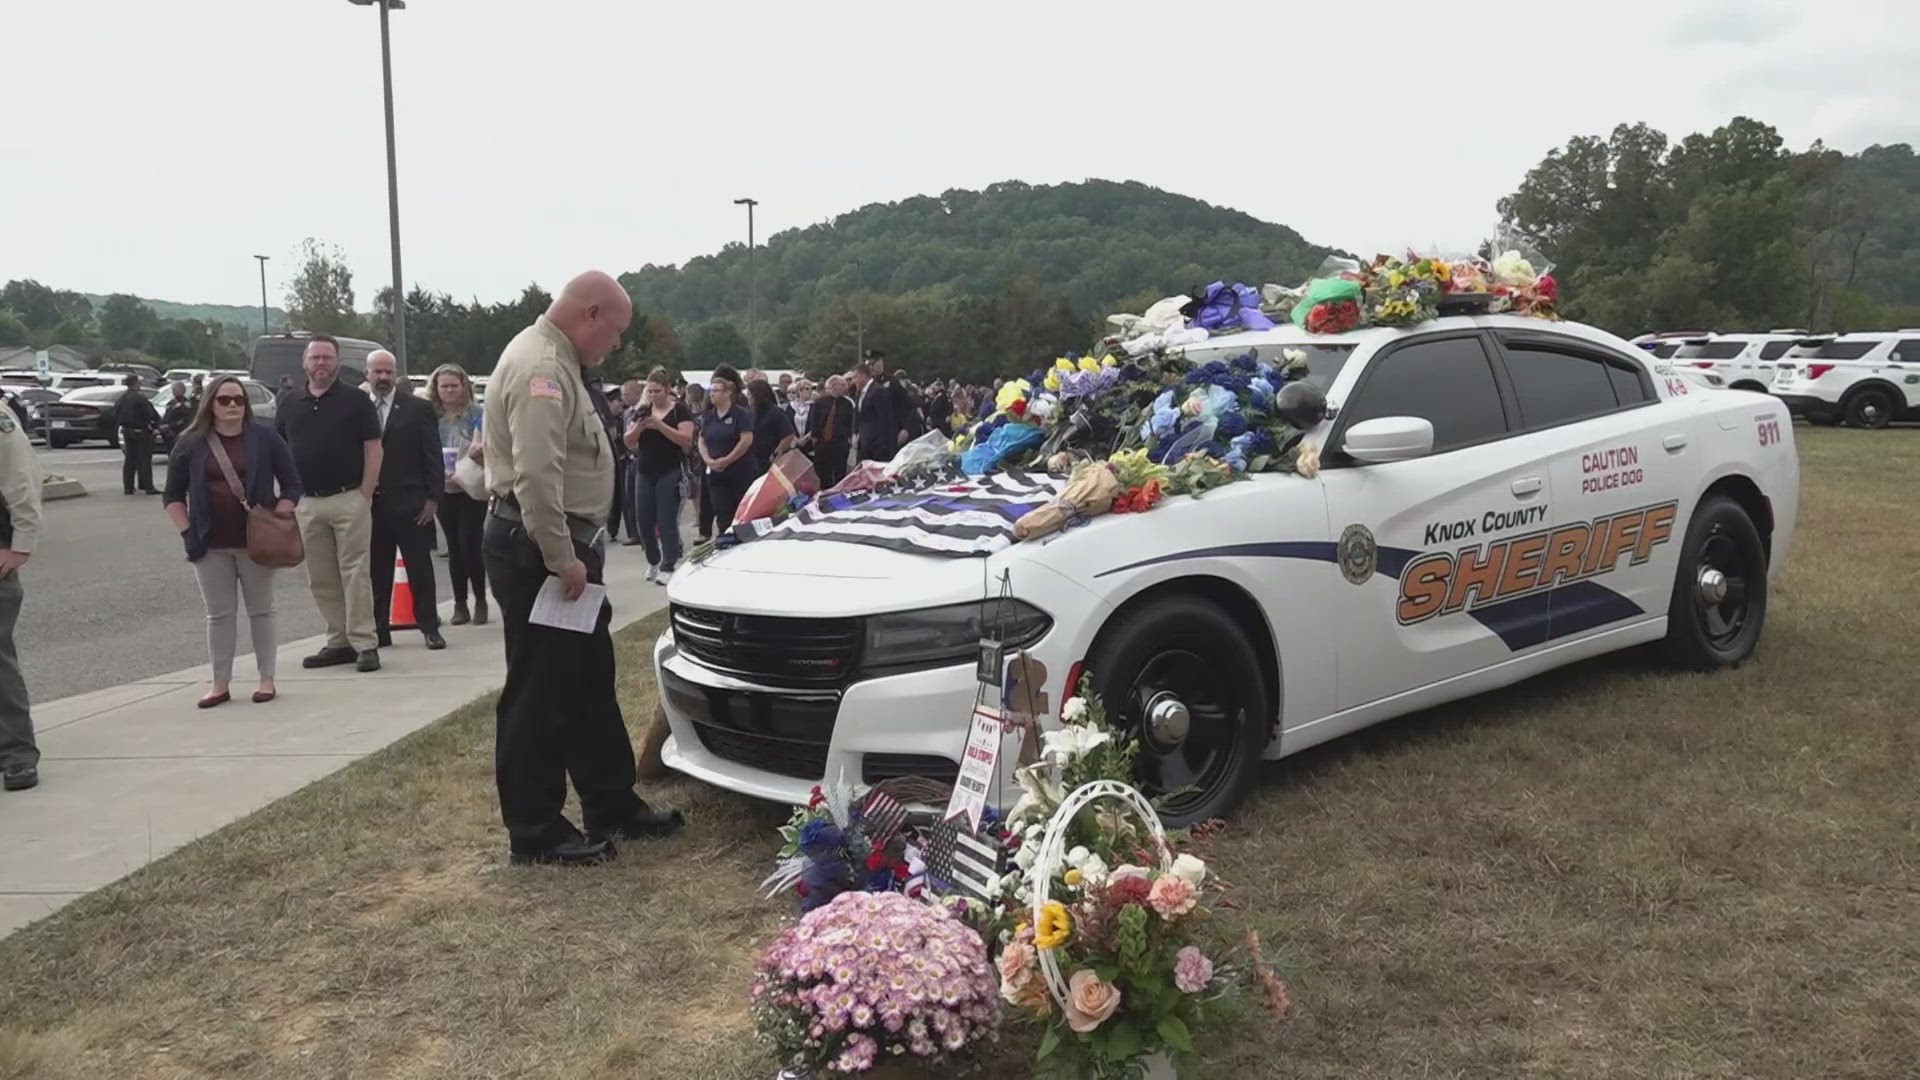 Sheriff Tom Spangler, widow Katarina Blakely and the rest of East Tennessee said their goodbyes to the fallen deputy.